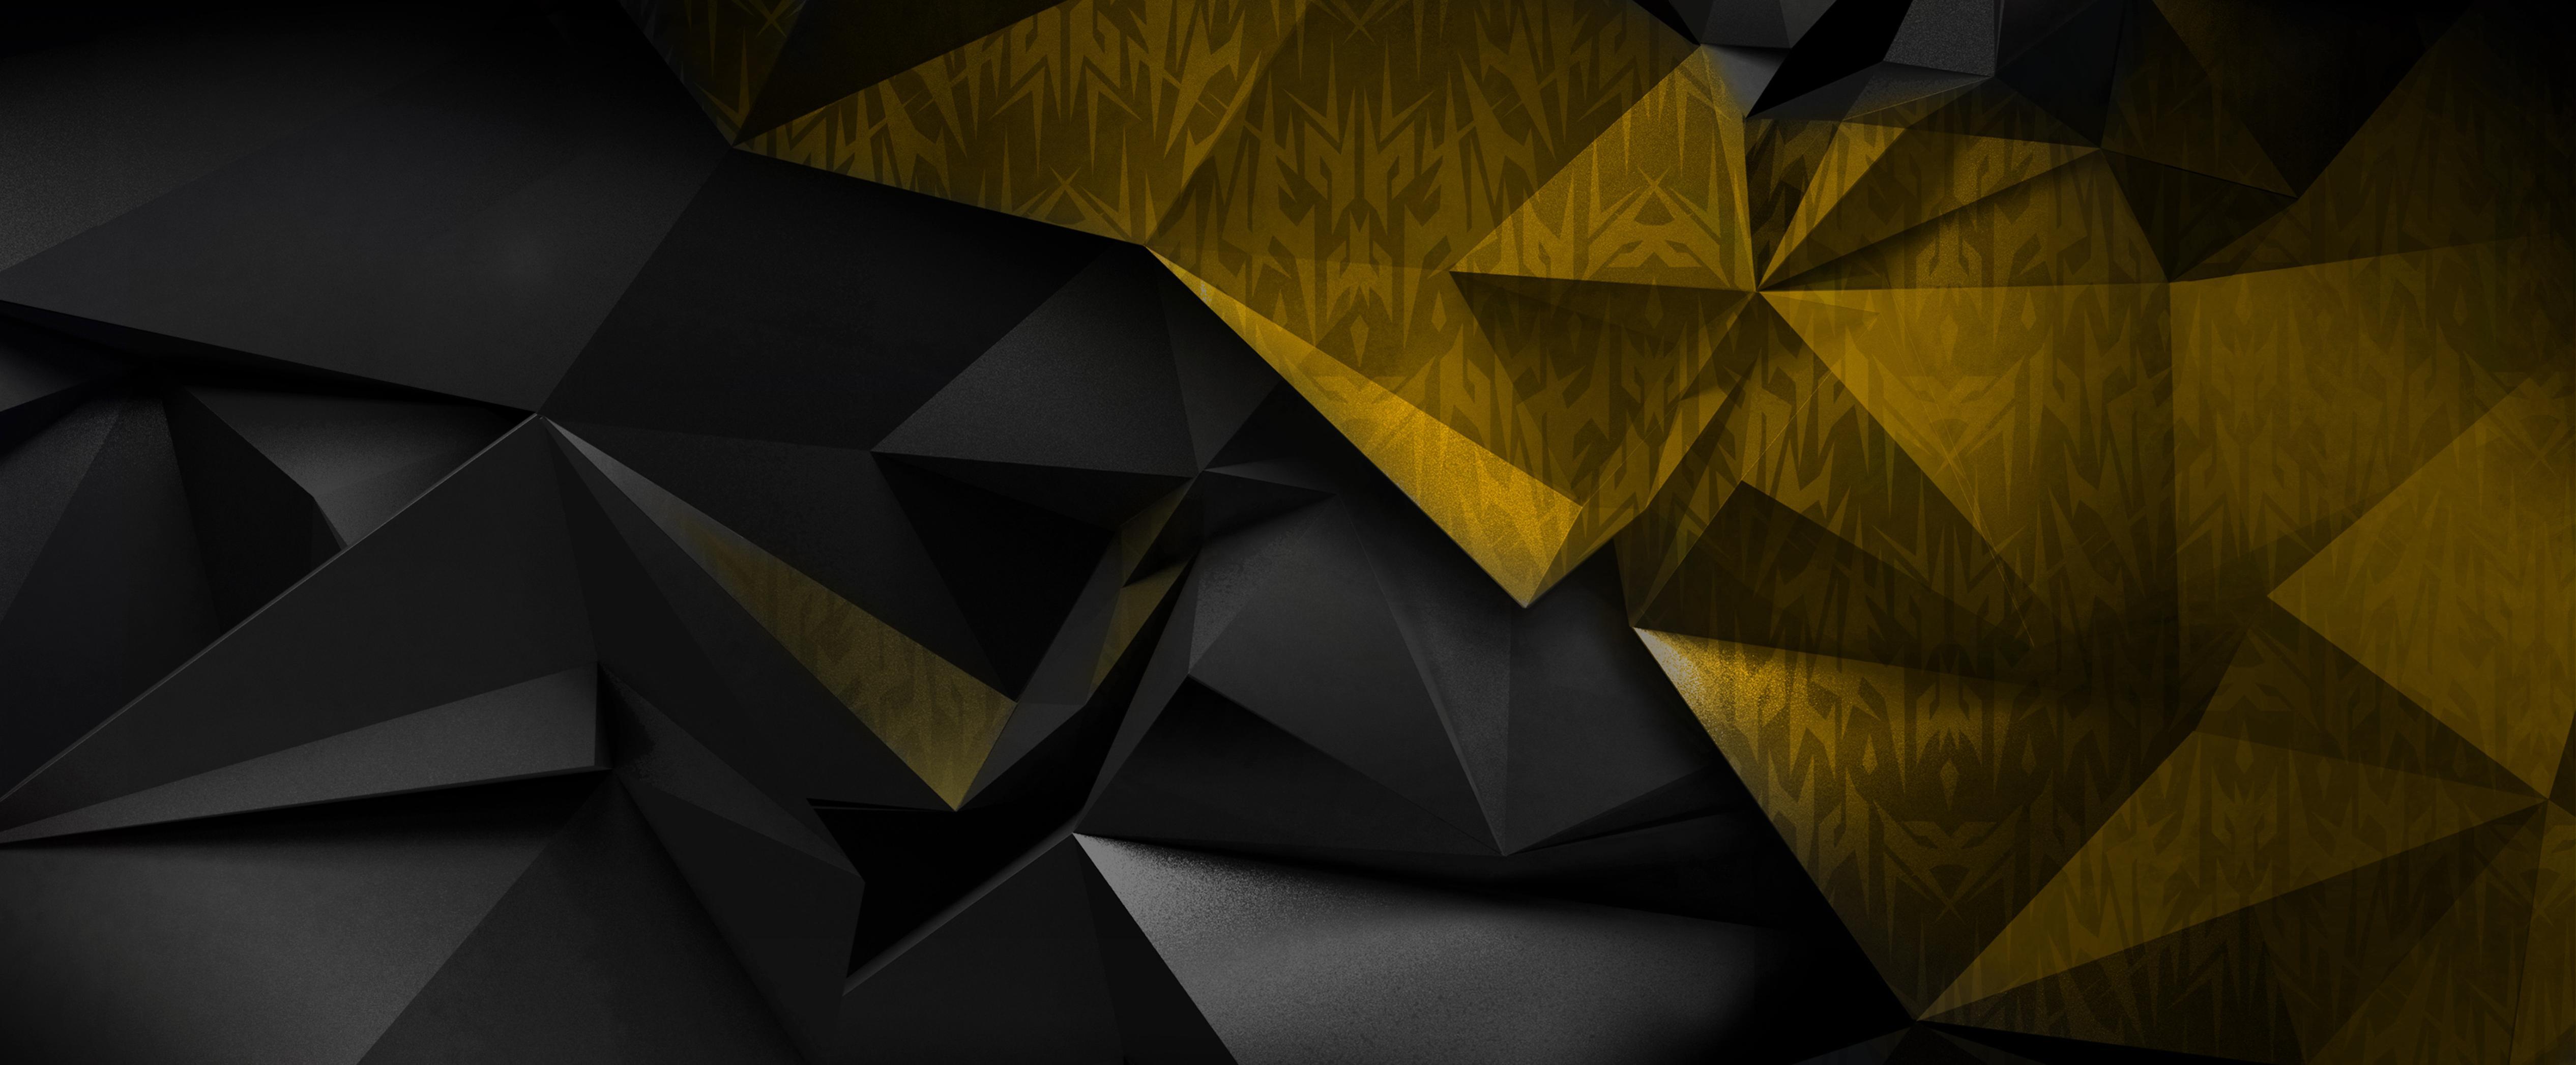 Gold Triangle Wallpapers Top Free Gold Triangle Backgrounds